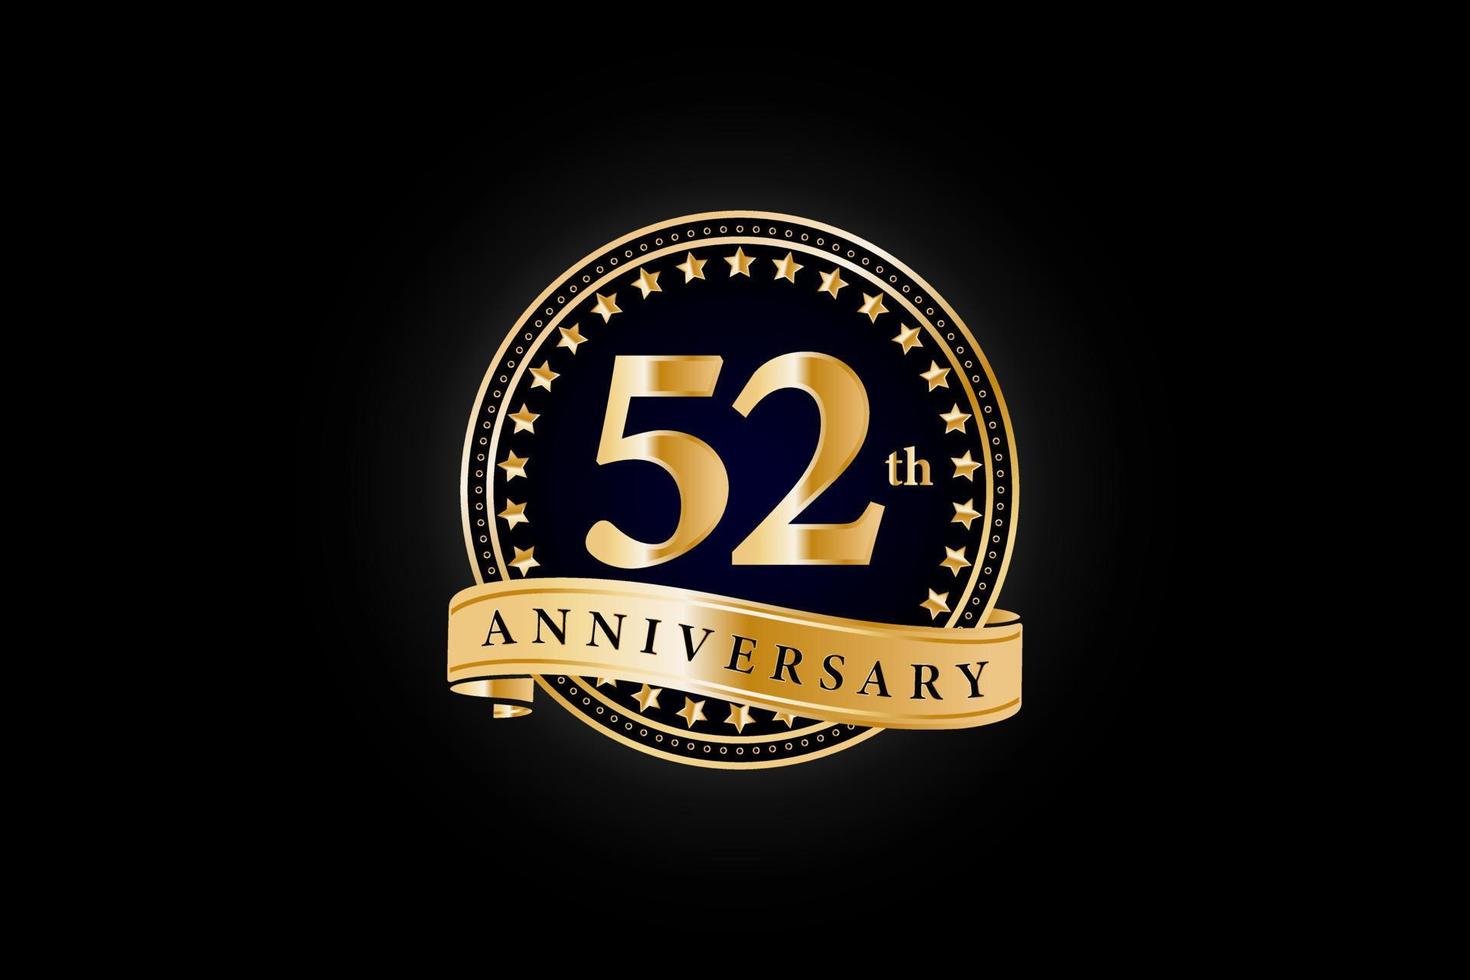 52th Anniversary golden gold logo with ring and gold ribbon isolated on black background, vector design for celebration.